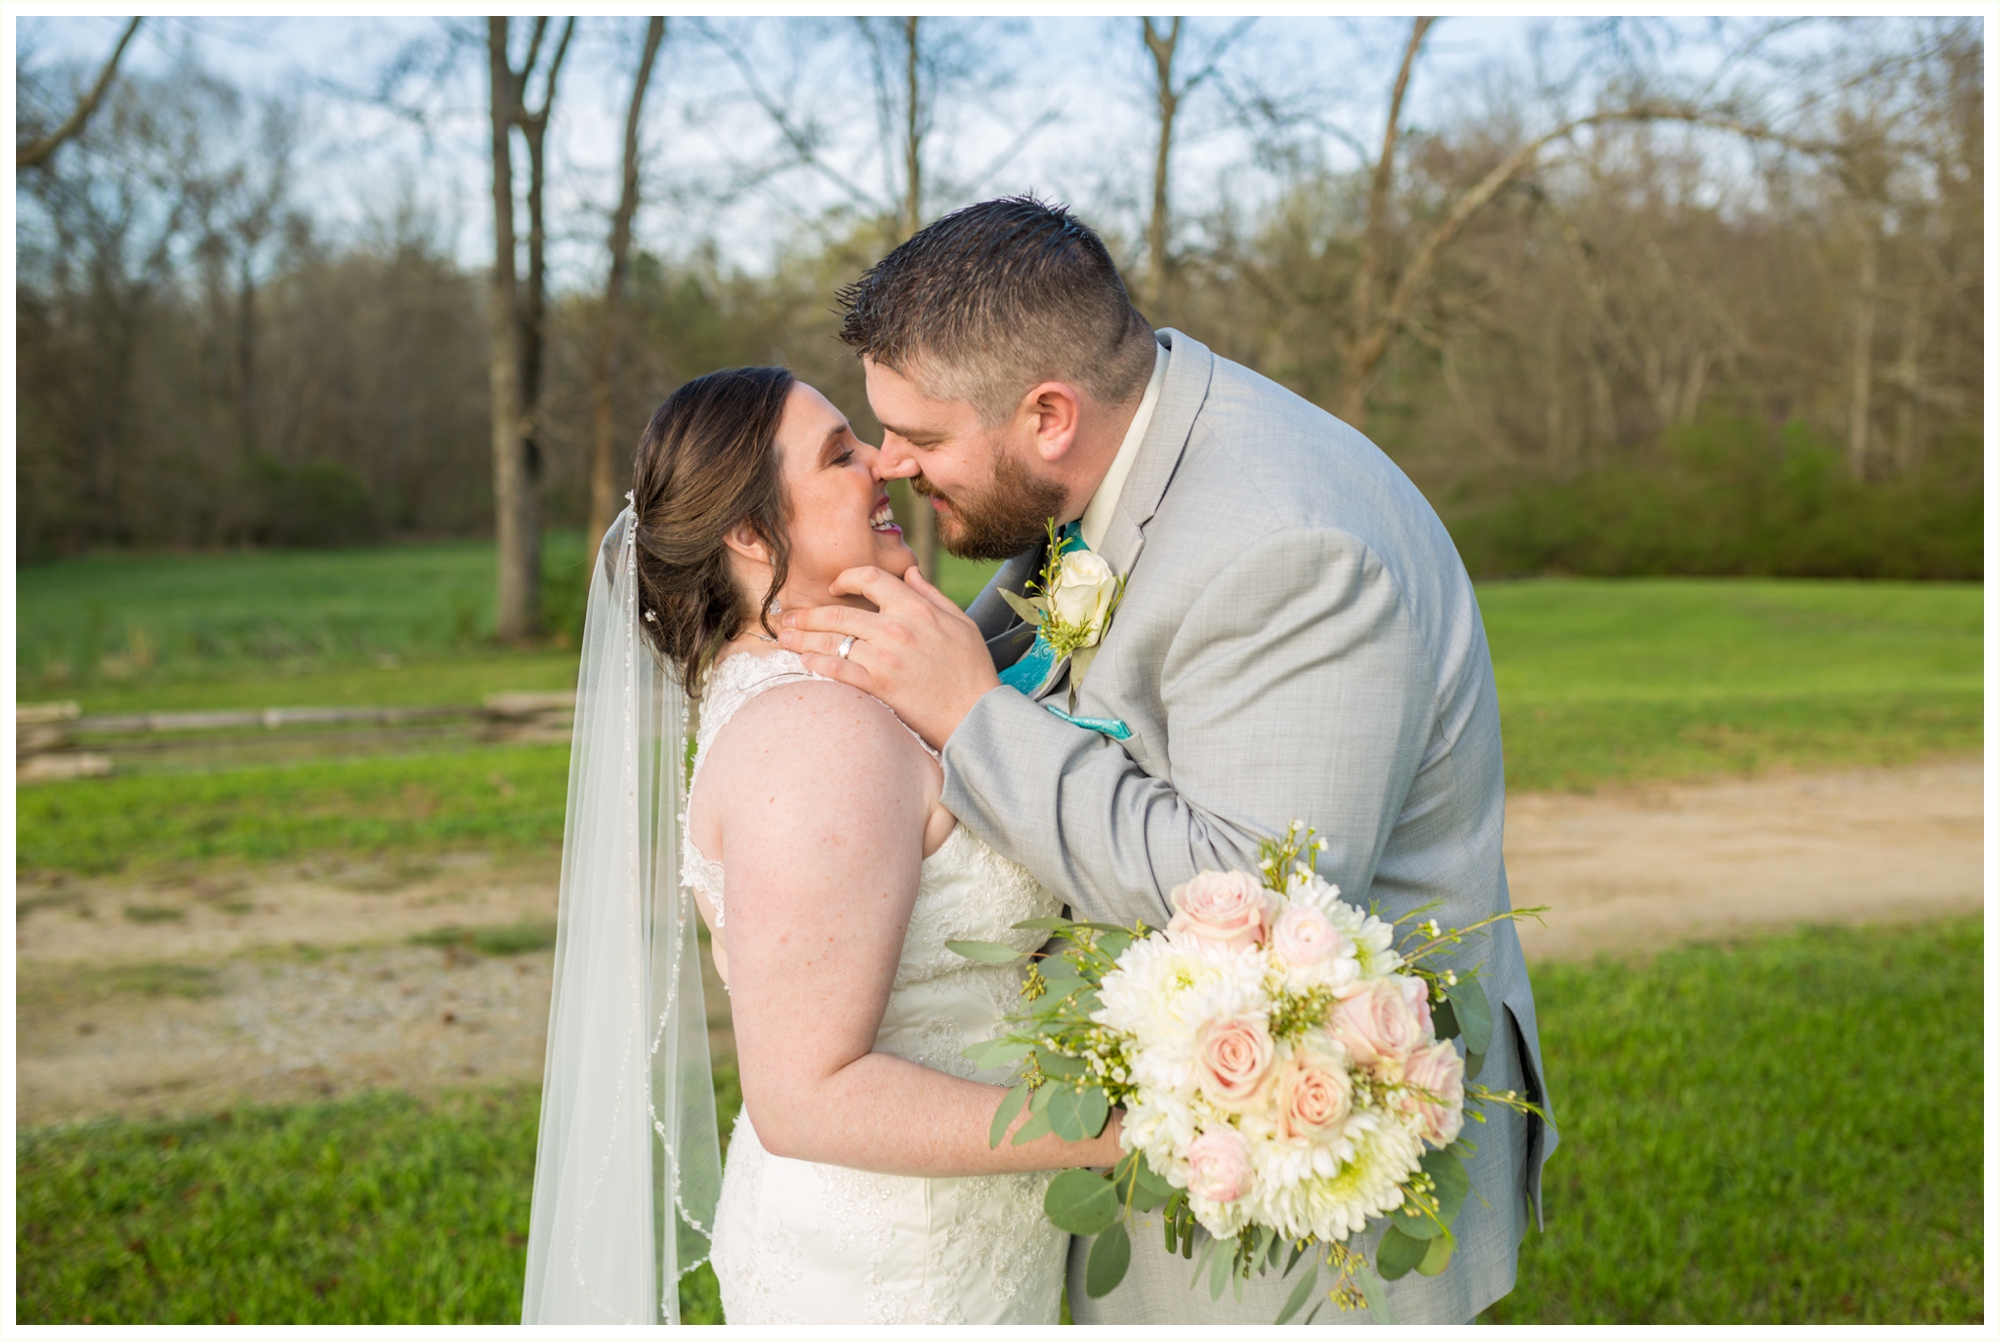 beautiful bride and groom portraits at spring lake events wedding in Georgia candid snuggly photos